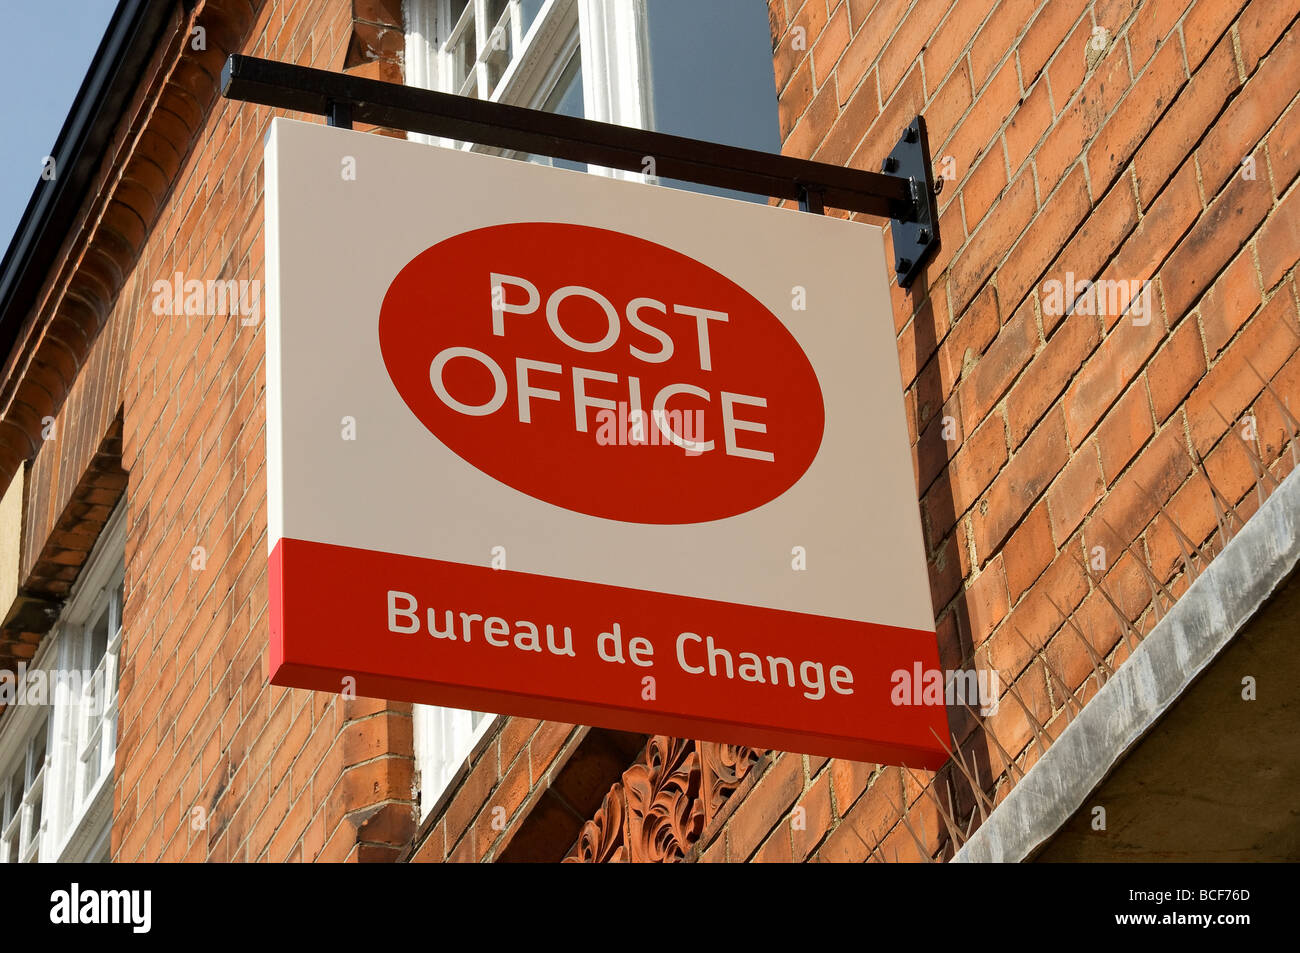 Exterior post office and bureau de change sign close up Beverley East Yorkshire England UK United Kingdom GB Great Britain Stock Photo